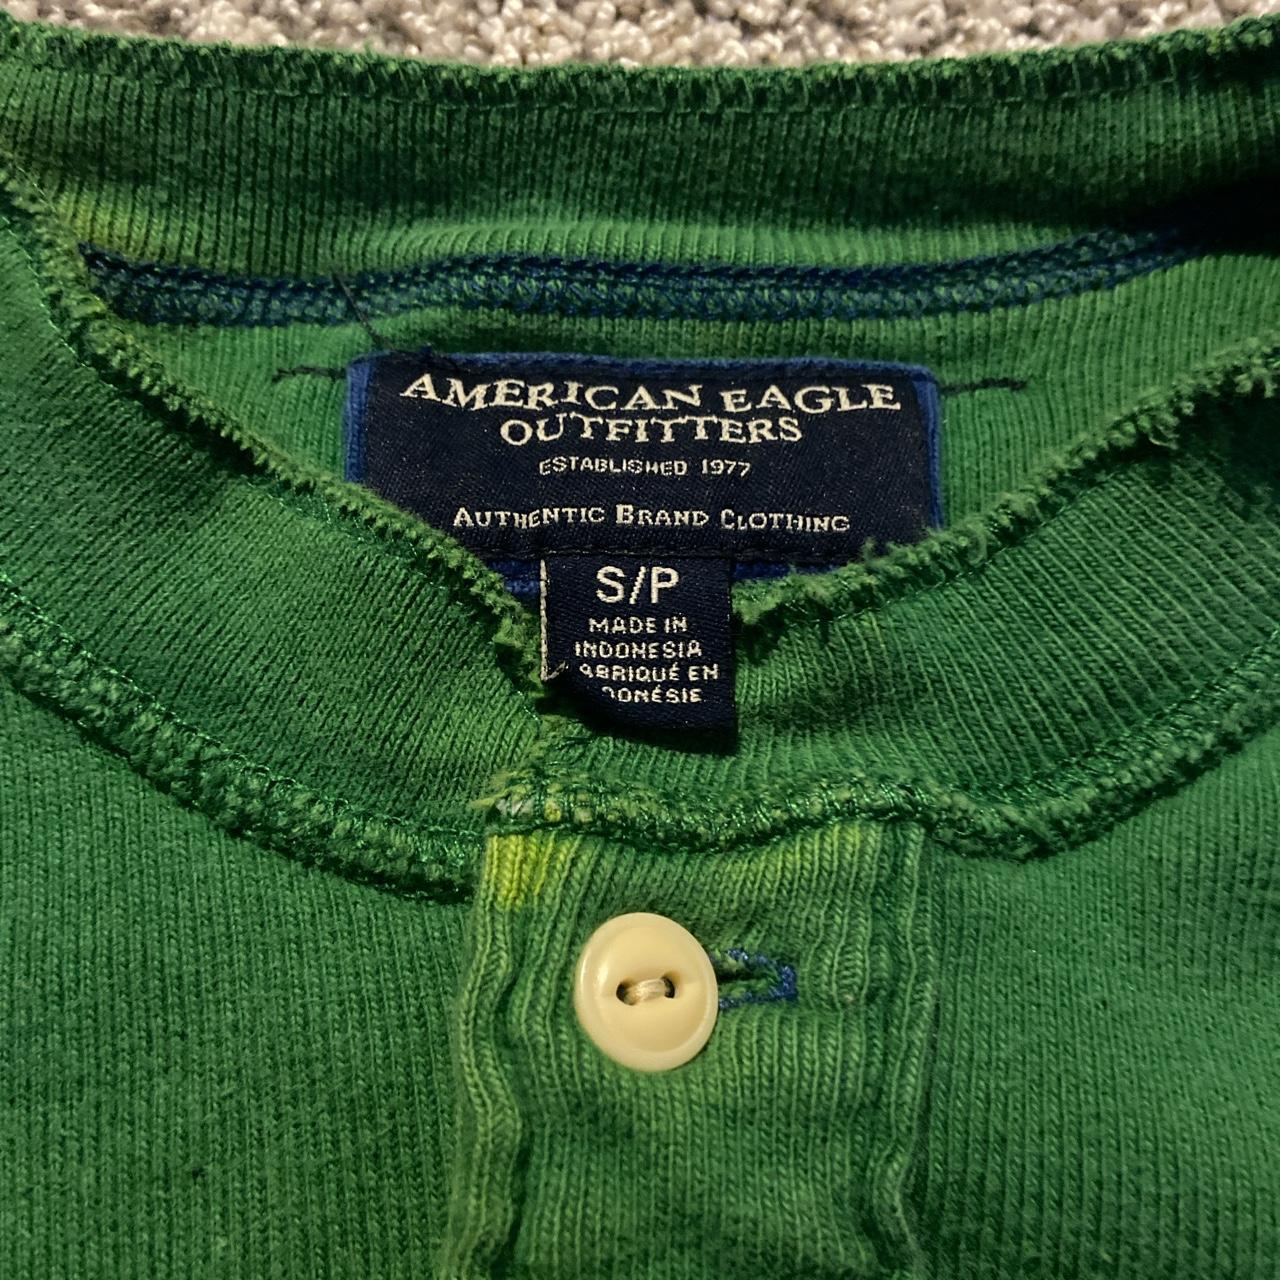 American Eagle Outfitters Women's Green and White Shirt (2)